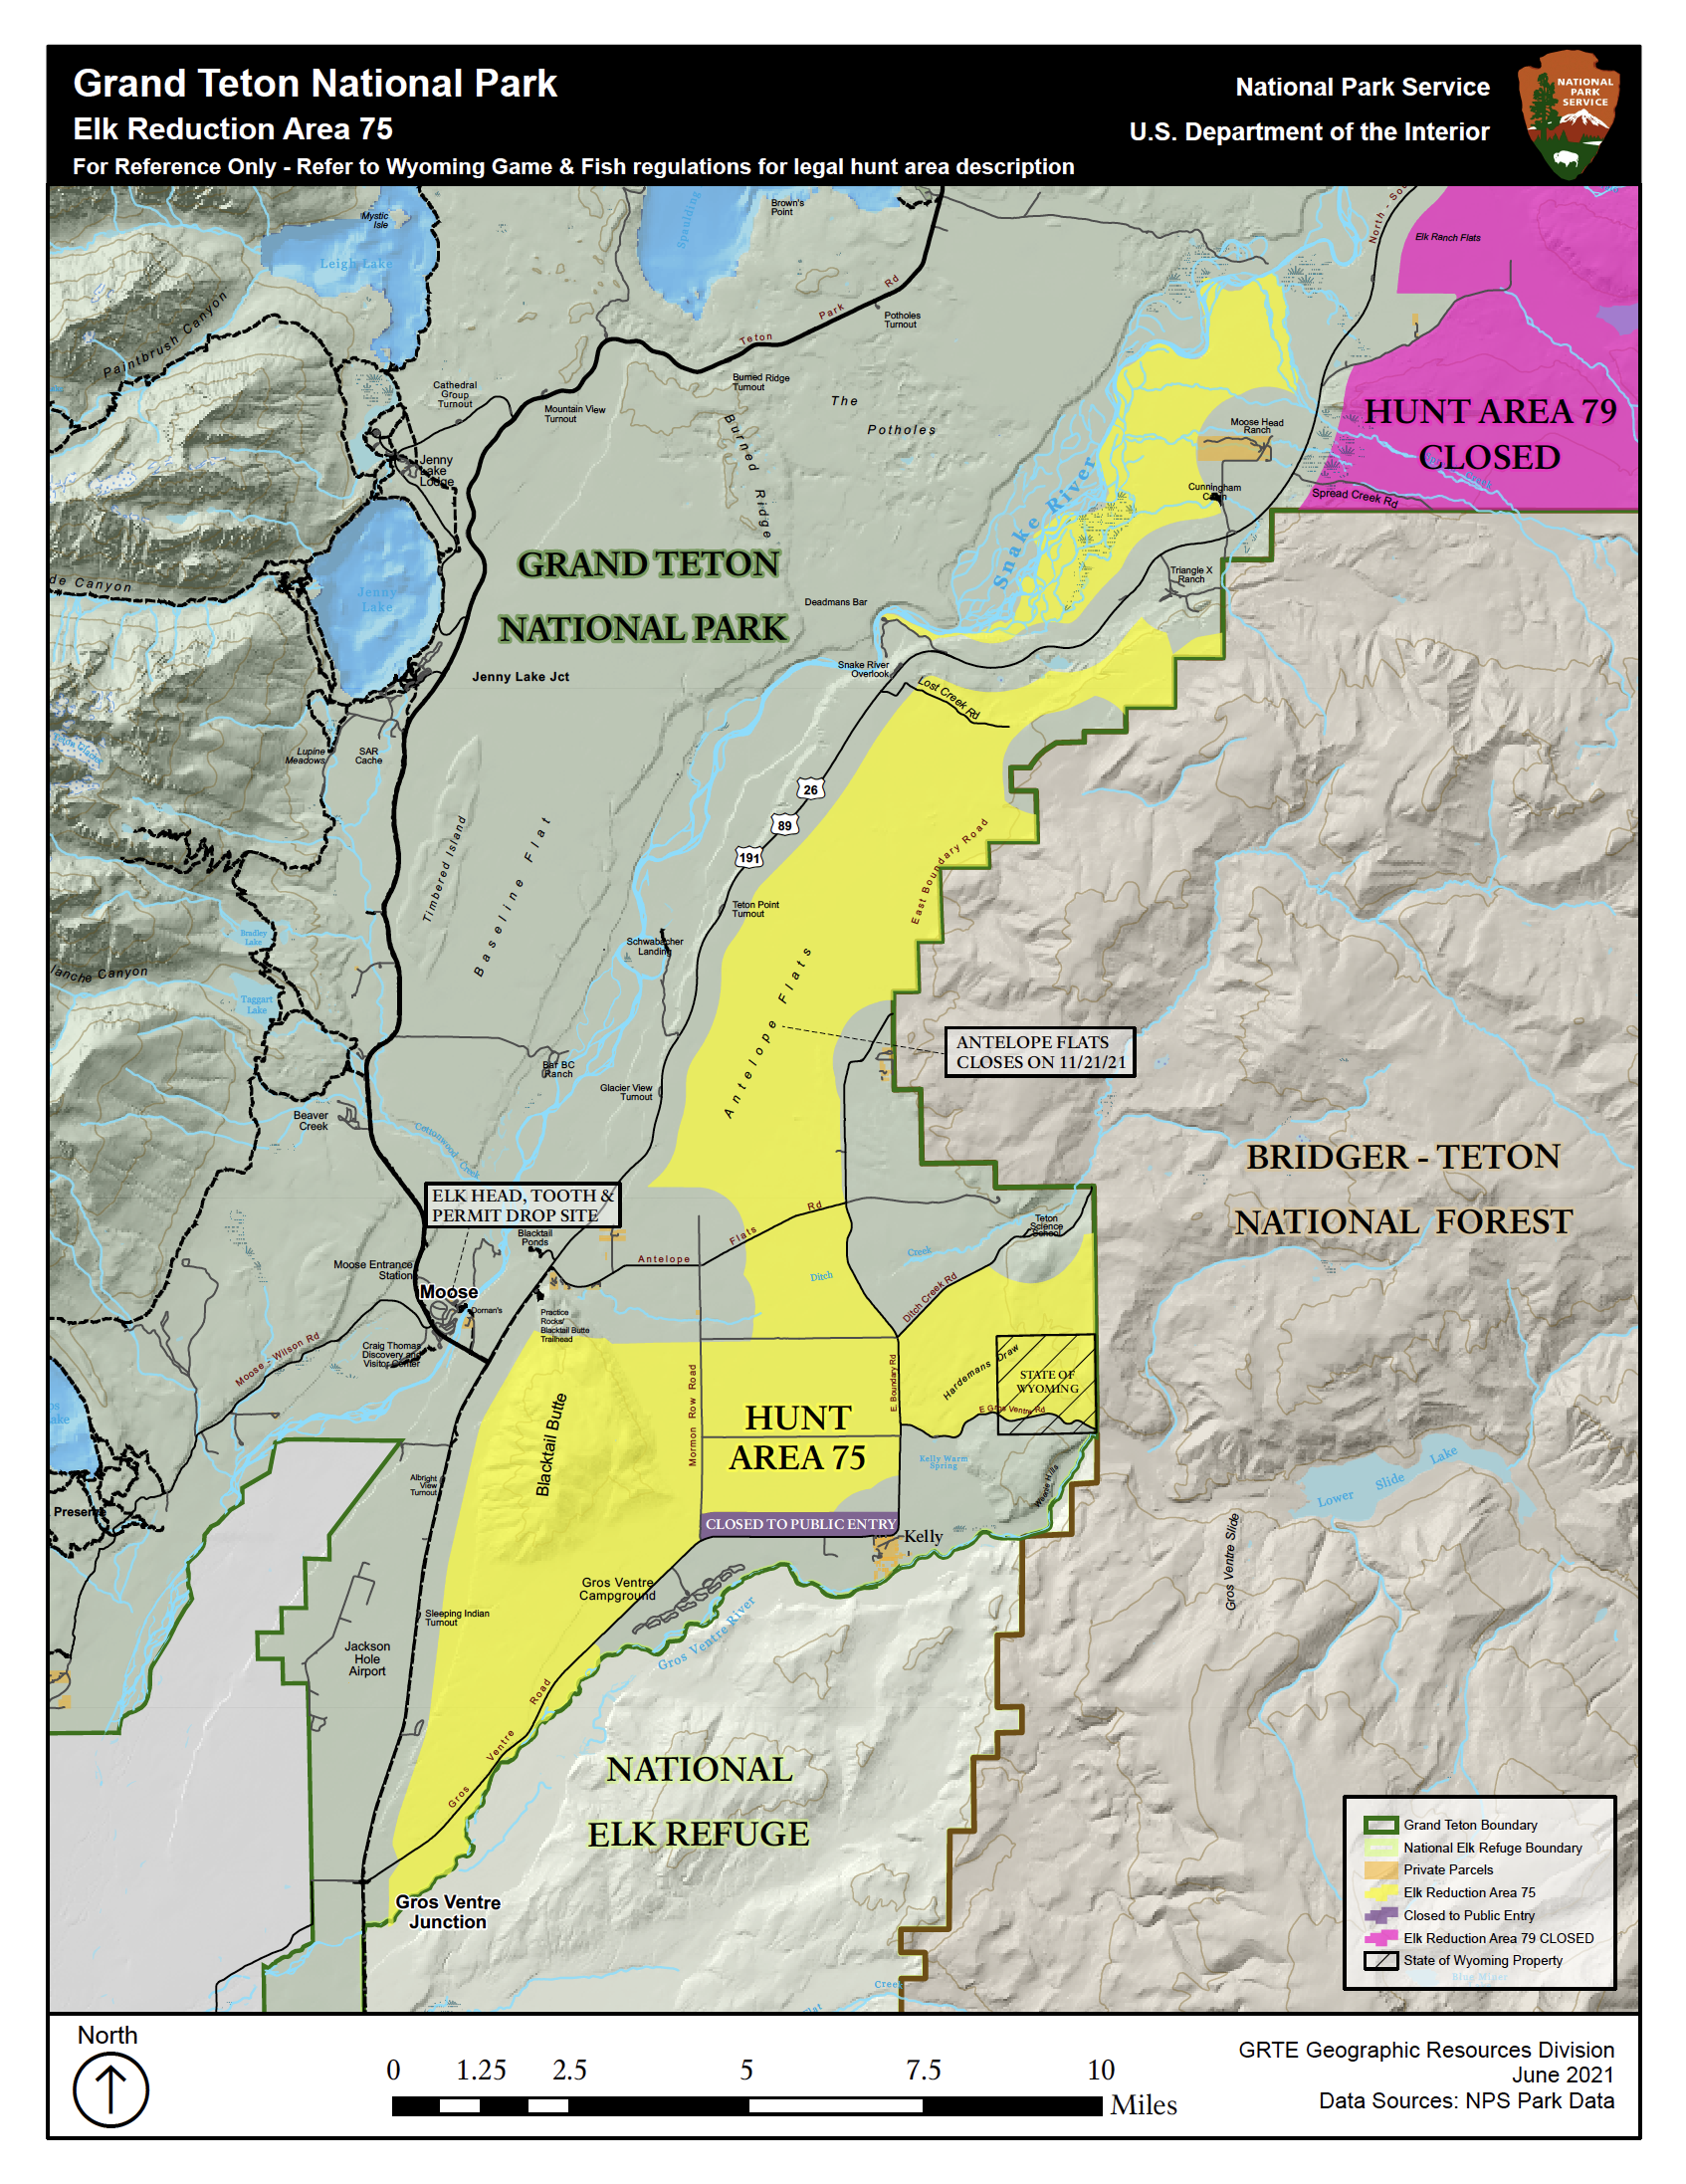 Map of Elk Reduction Area 75 showing the east side of Grand Teton National Park